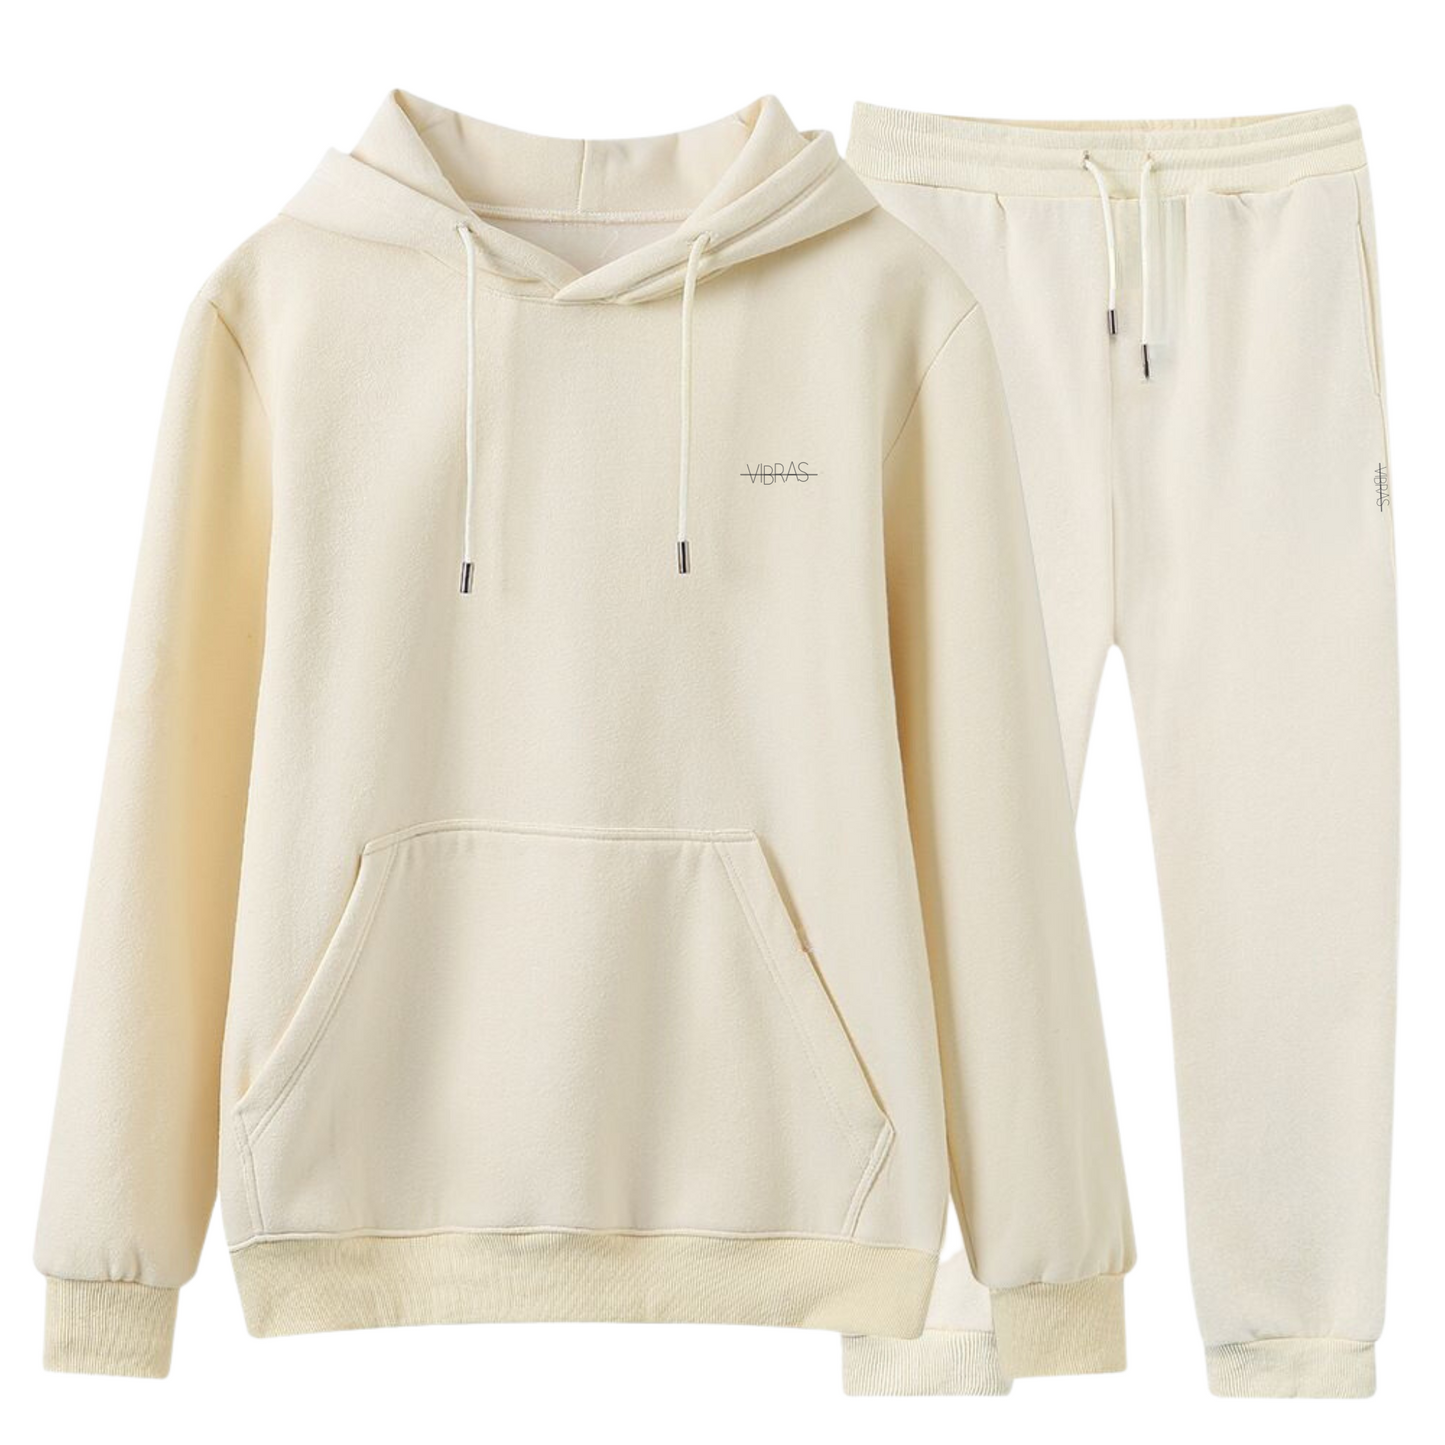 Photo of a cozy and unisex fleece tracksuit set in a cream shade.